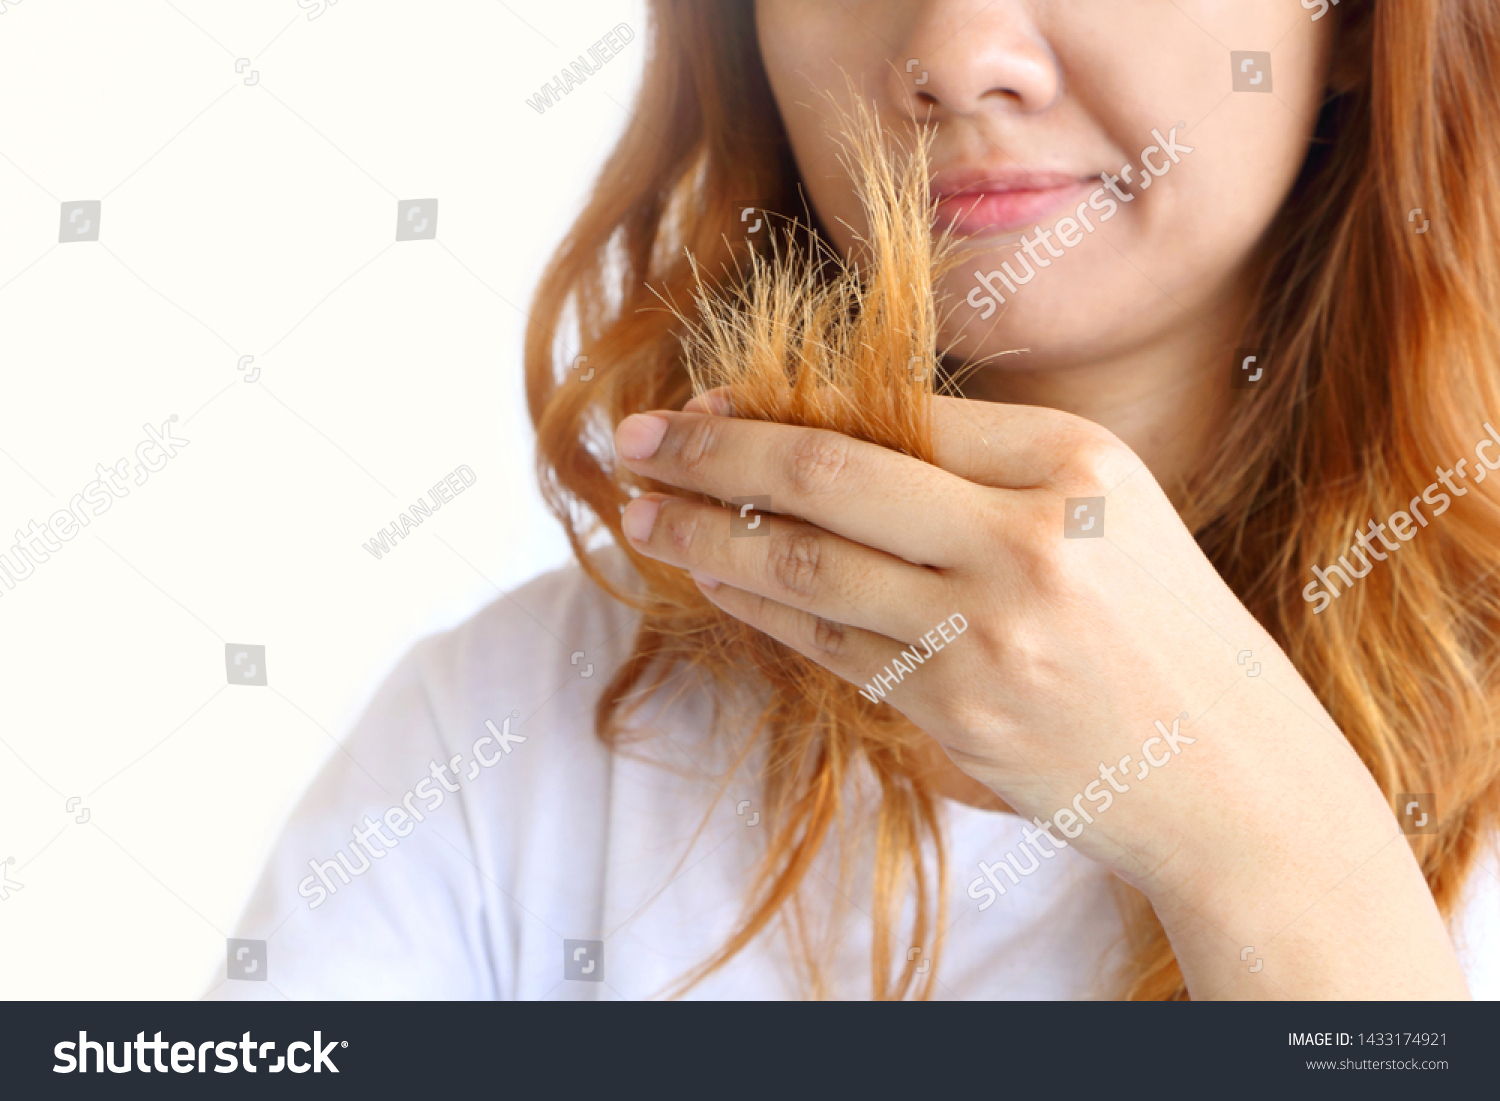 Asain woman holding her long hairs that make color treatments. The hairs maybe have problem breakage (split end) .Should care or cut end of hairs. On white background. #1433174921